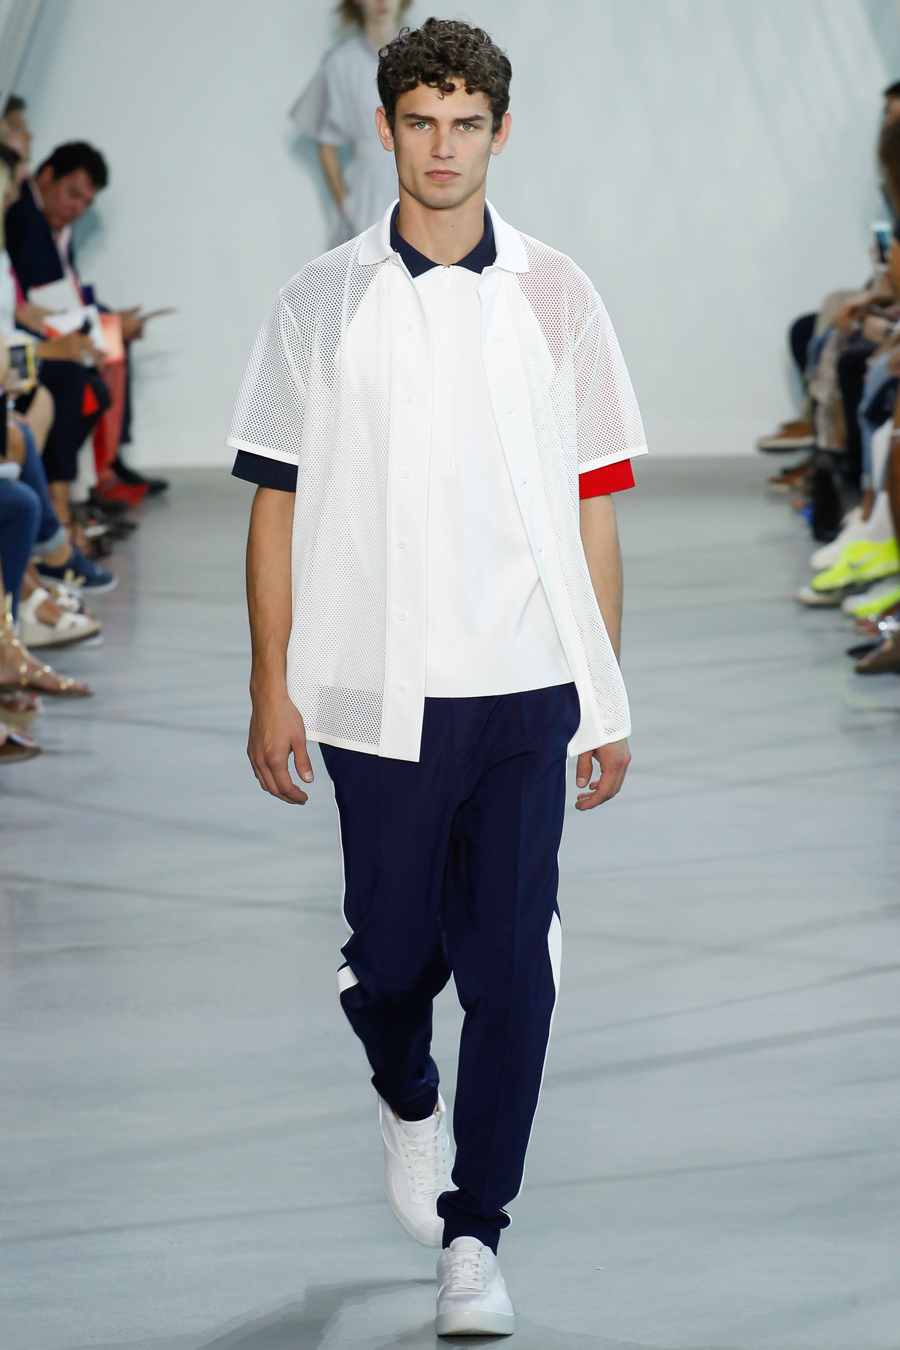 Lacoste Spring Summer 2016 Menswear Collection New York Fashion Week 002